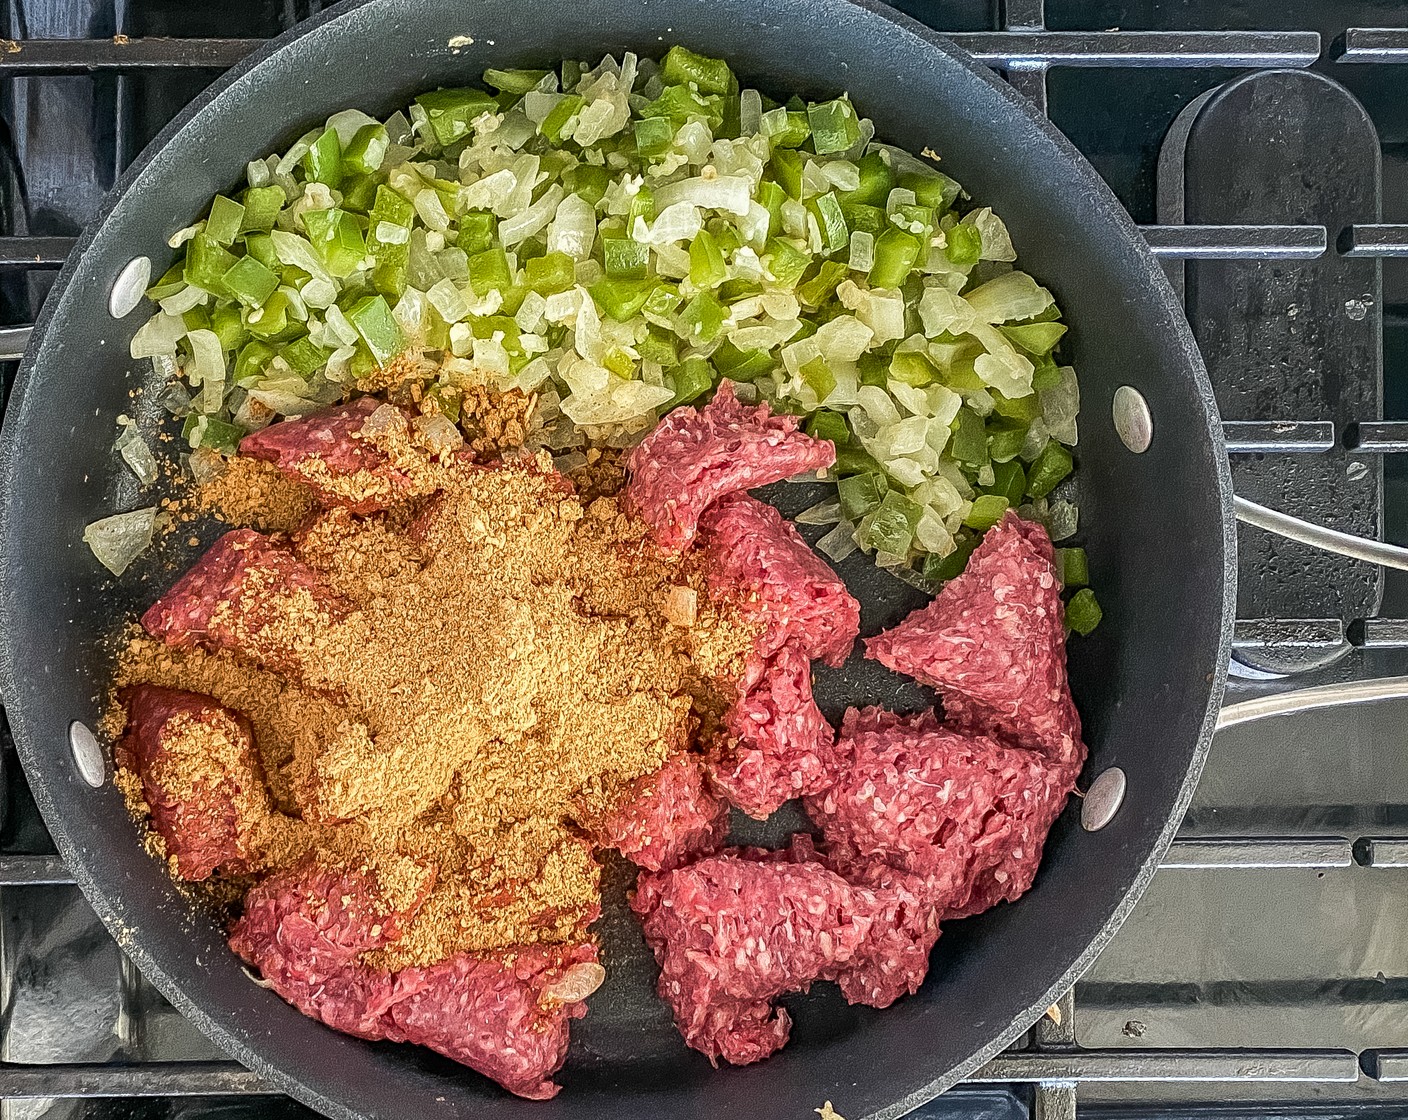 step 2 Stir in Garlic (5 cloves) and cook for 2 minutes. Add in 96/4 Lean Ground Beef (1 lb) and McCormick® Taco Seasoning Mix (1 packet) and sauté until brown for 7 minutes.